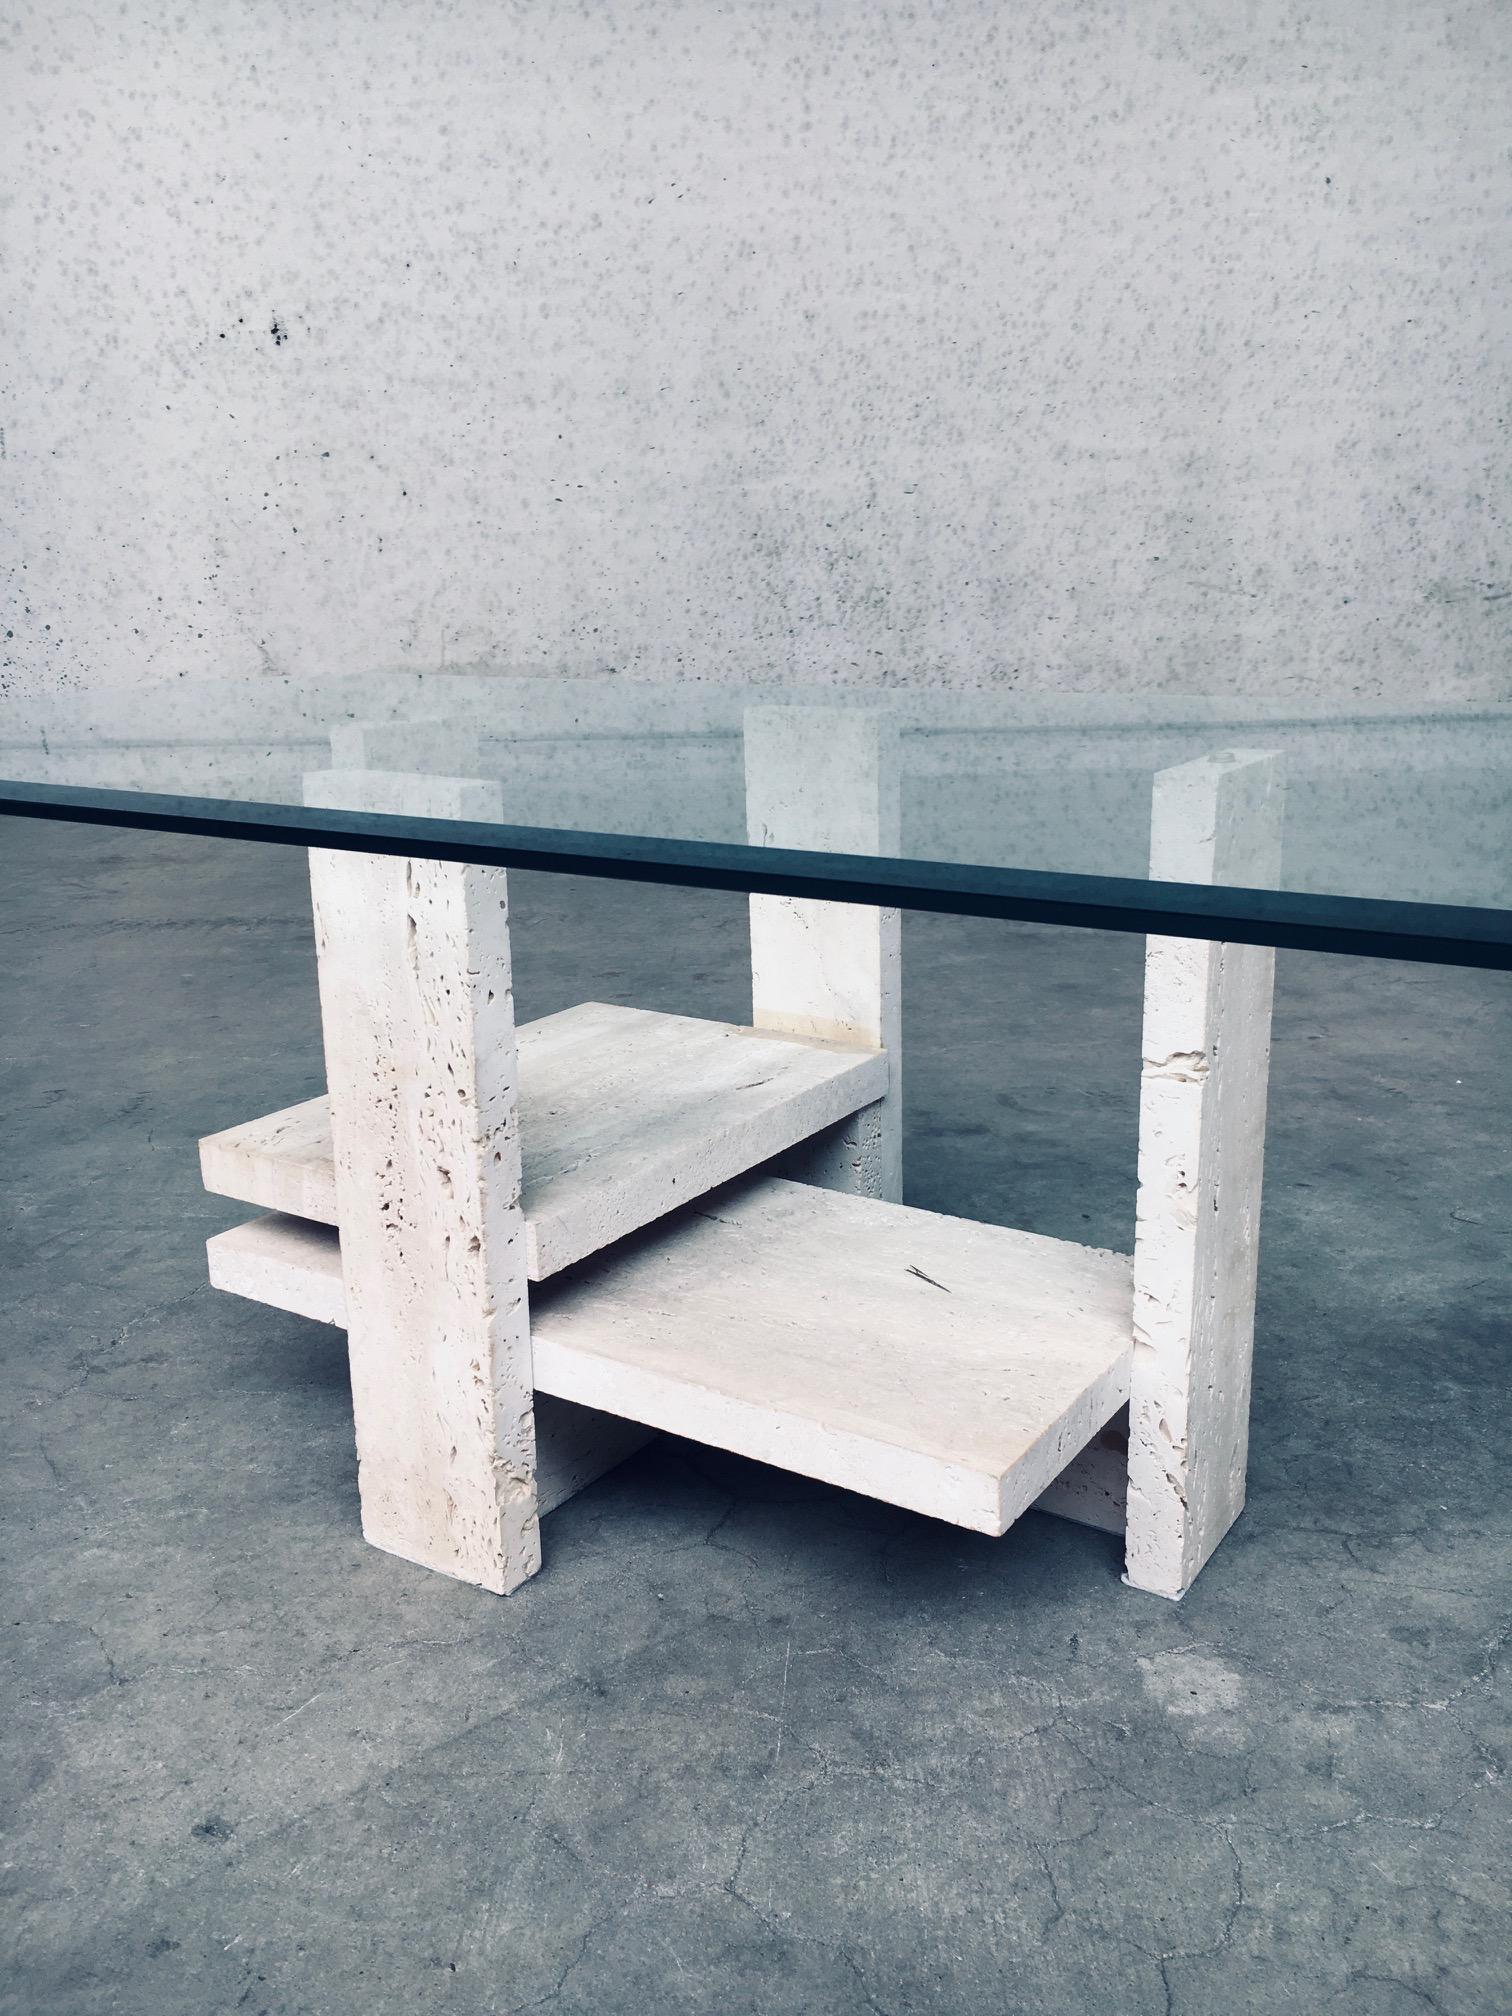 Brutalist Design Travertine Coffee Table by Willy Ballez, Belgium 1970's For Sale 12